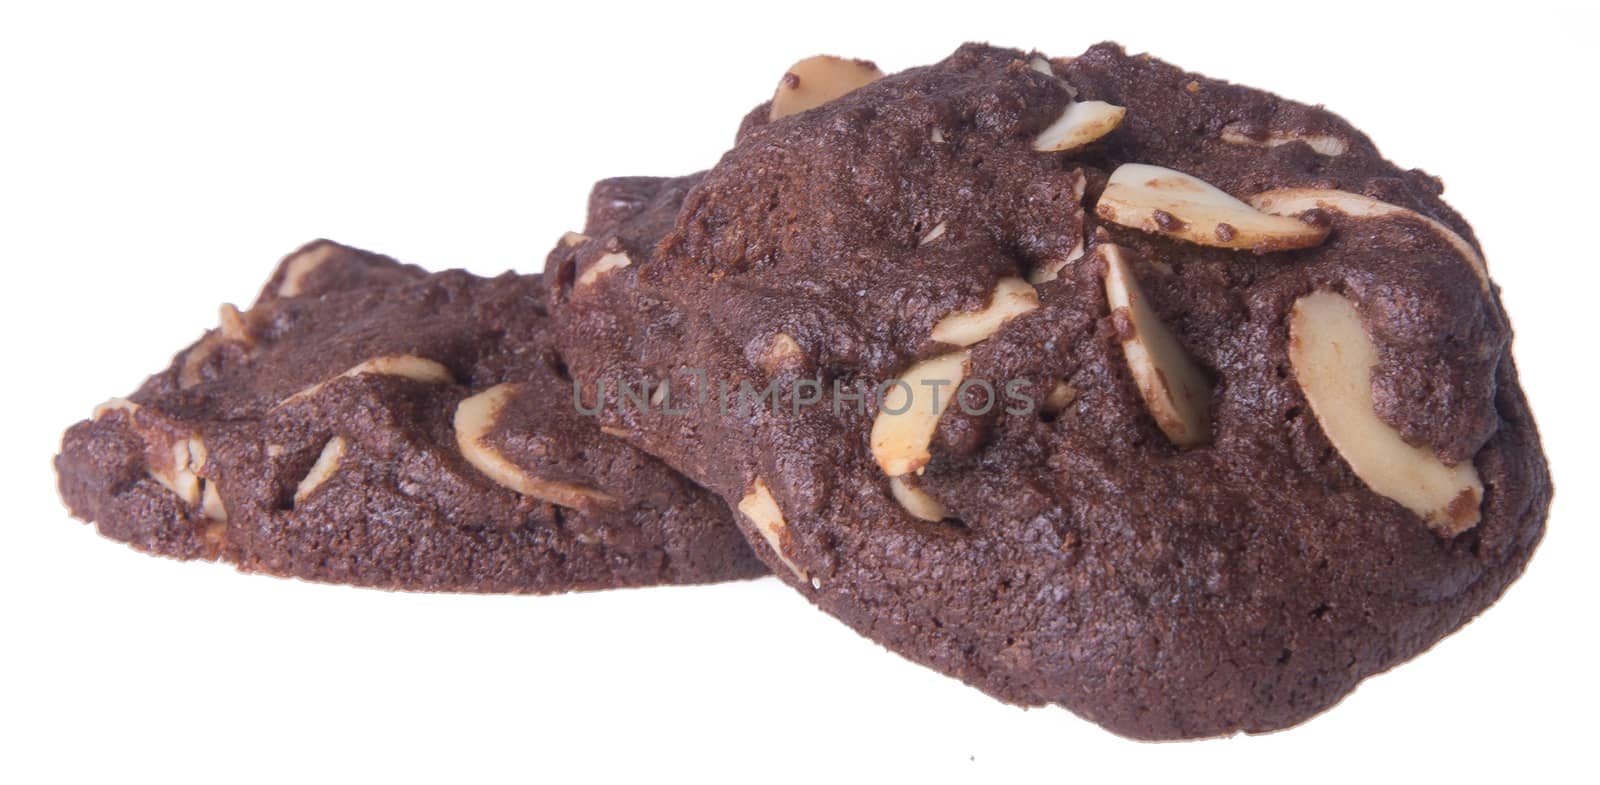 Almonds chocolate chips cookies on background by heinteh